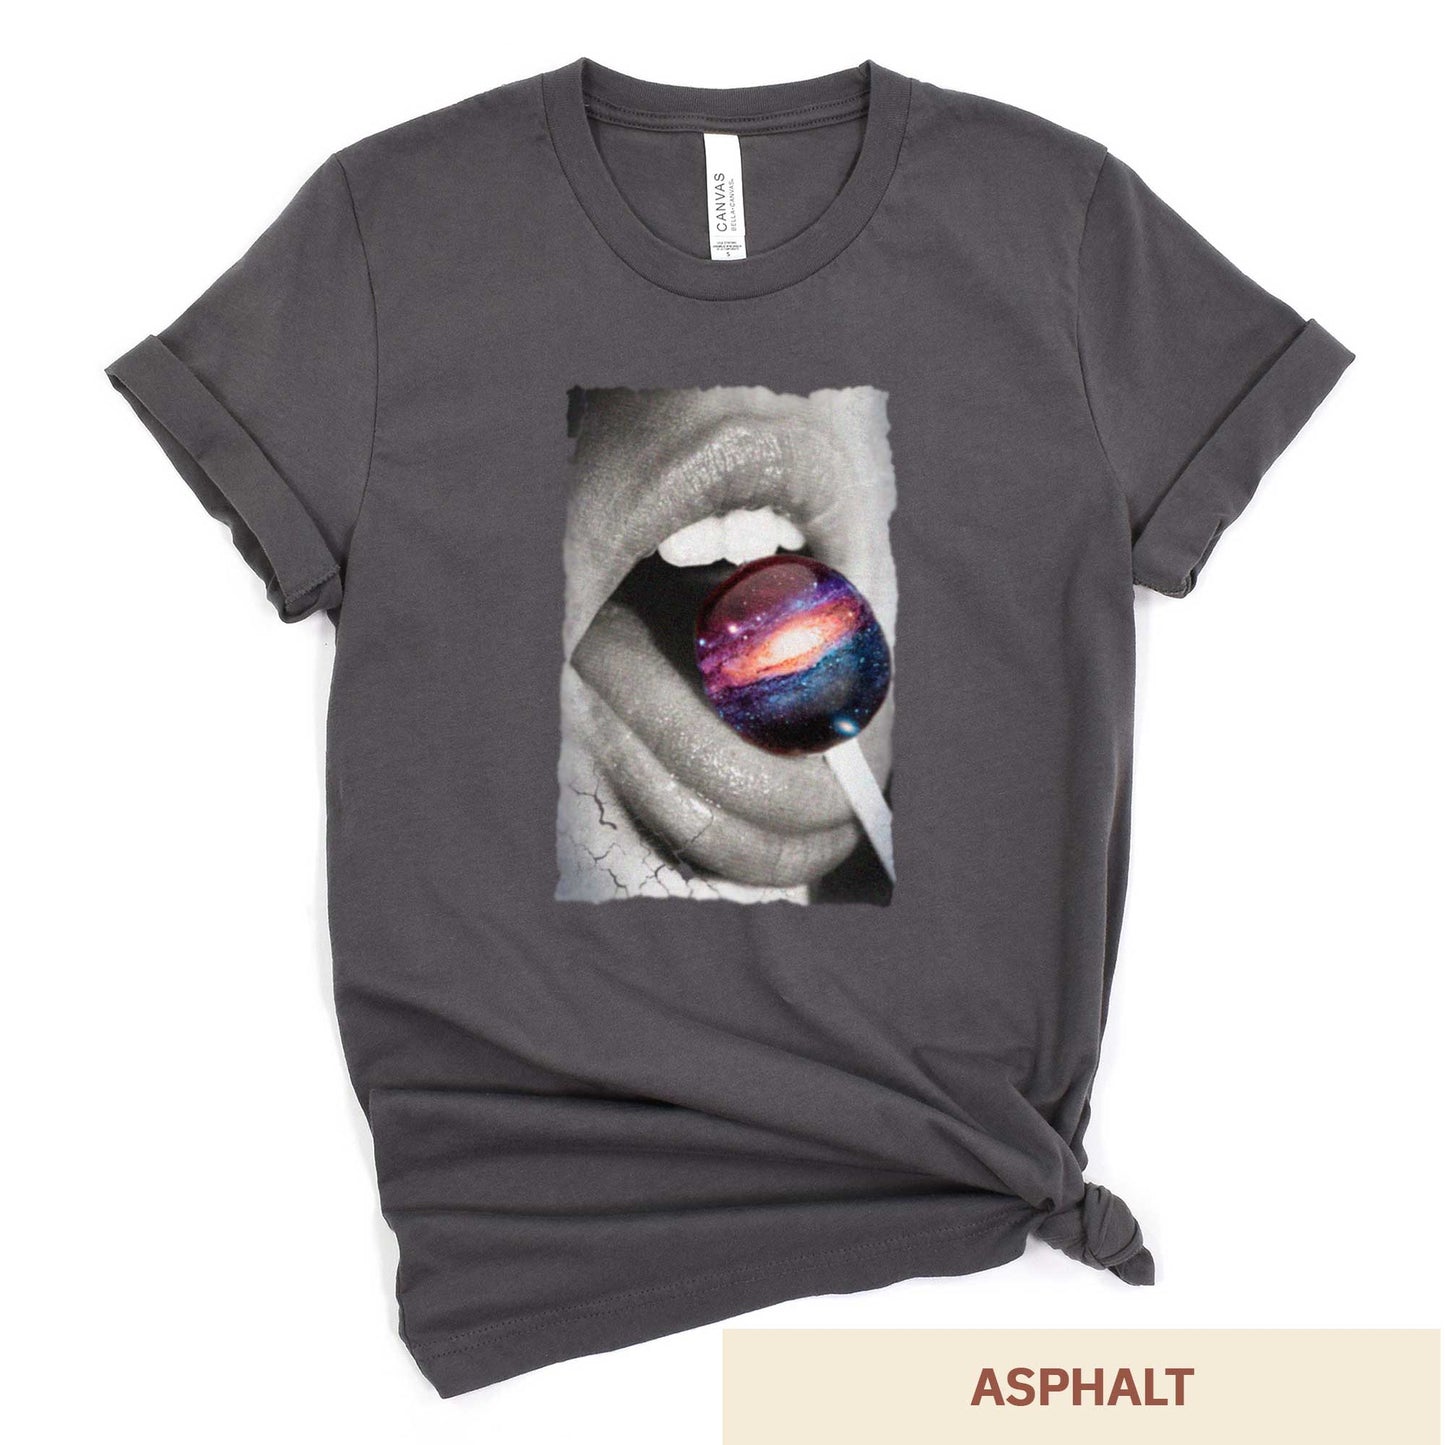 An asphalt grey Bella Canvas t-shirt with a black and white image of a woman's mouth eating a lollipop that looks like a swirling galaxy.